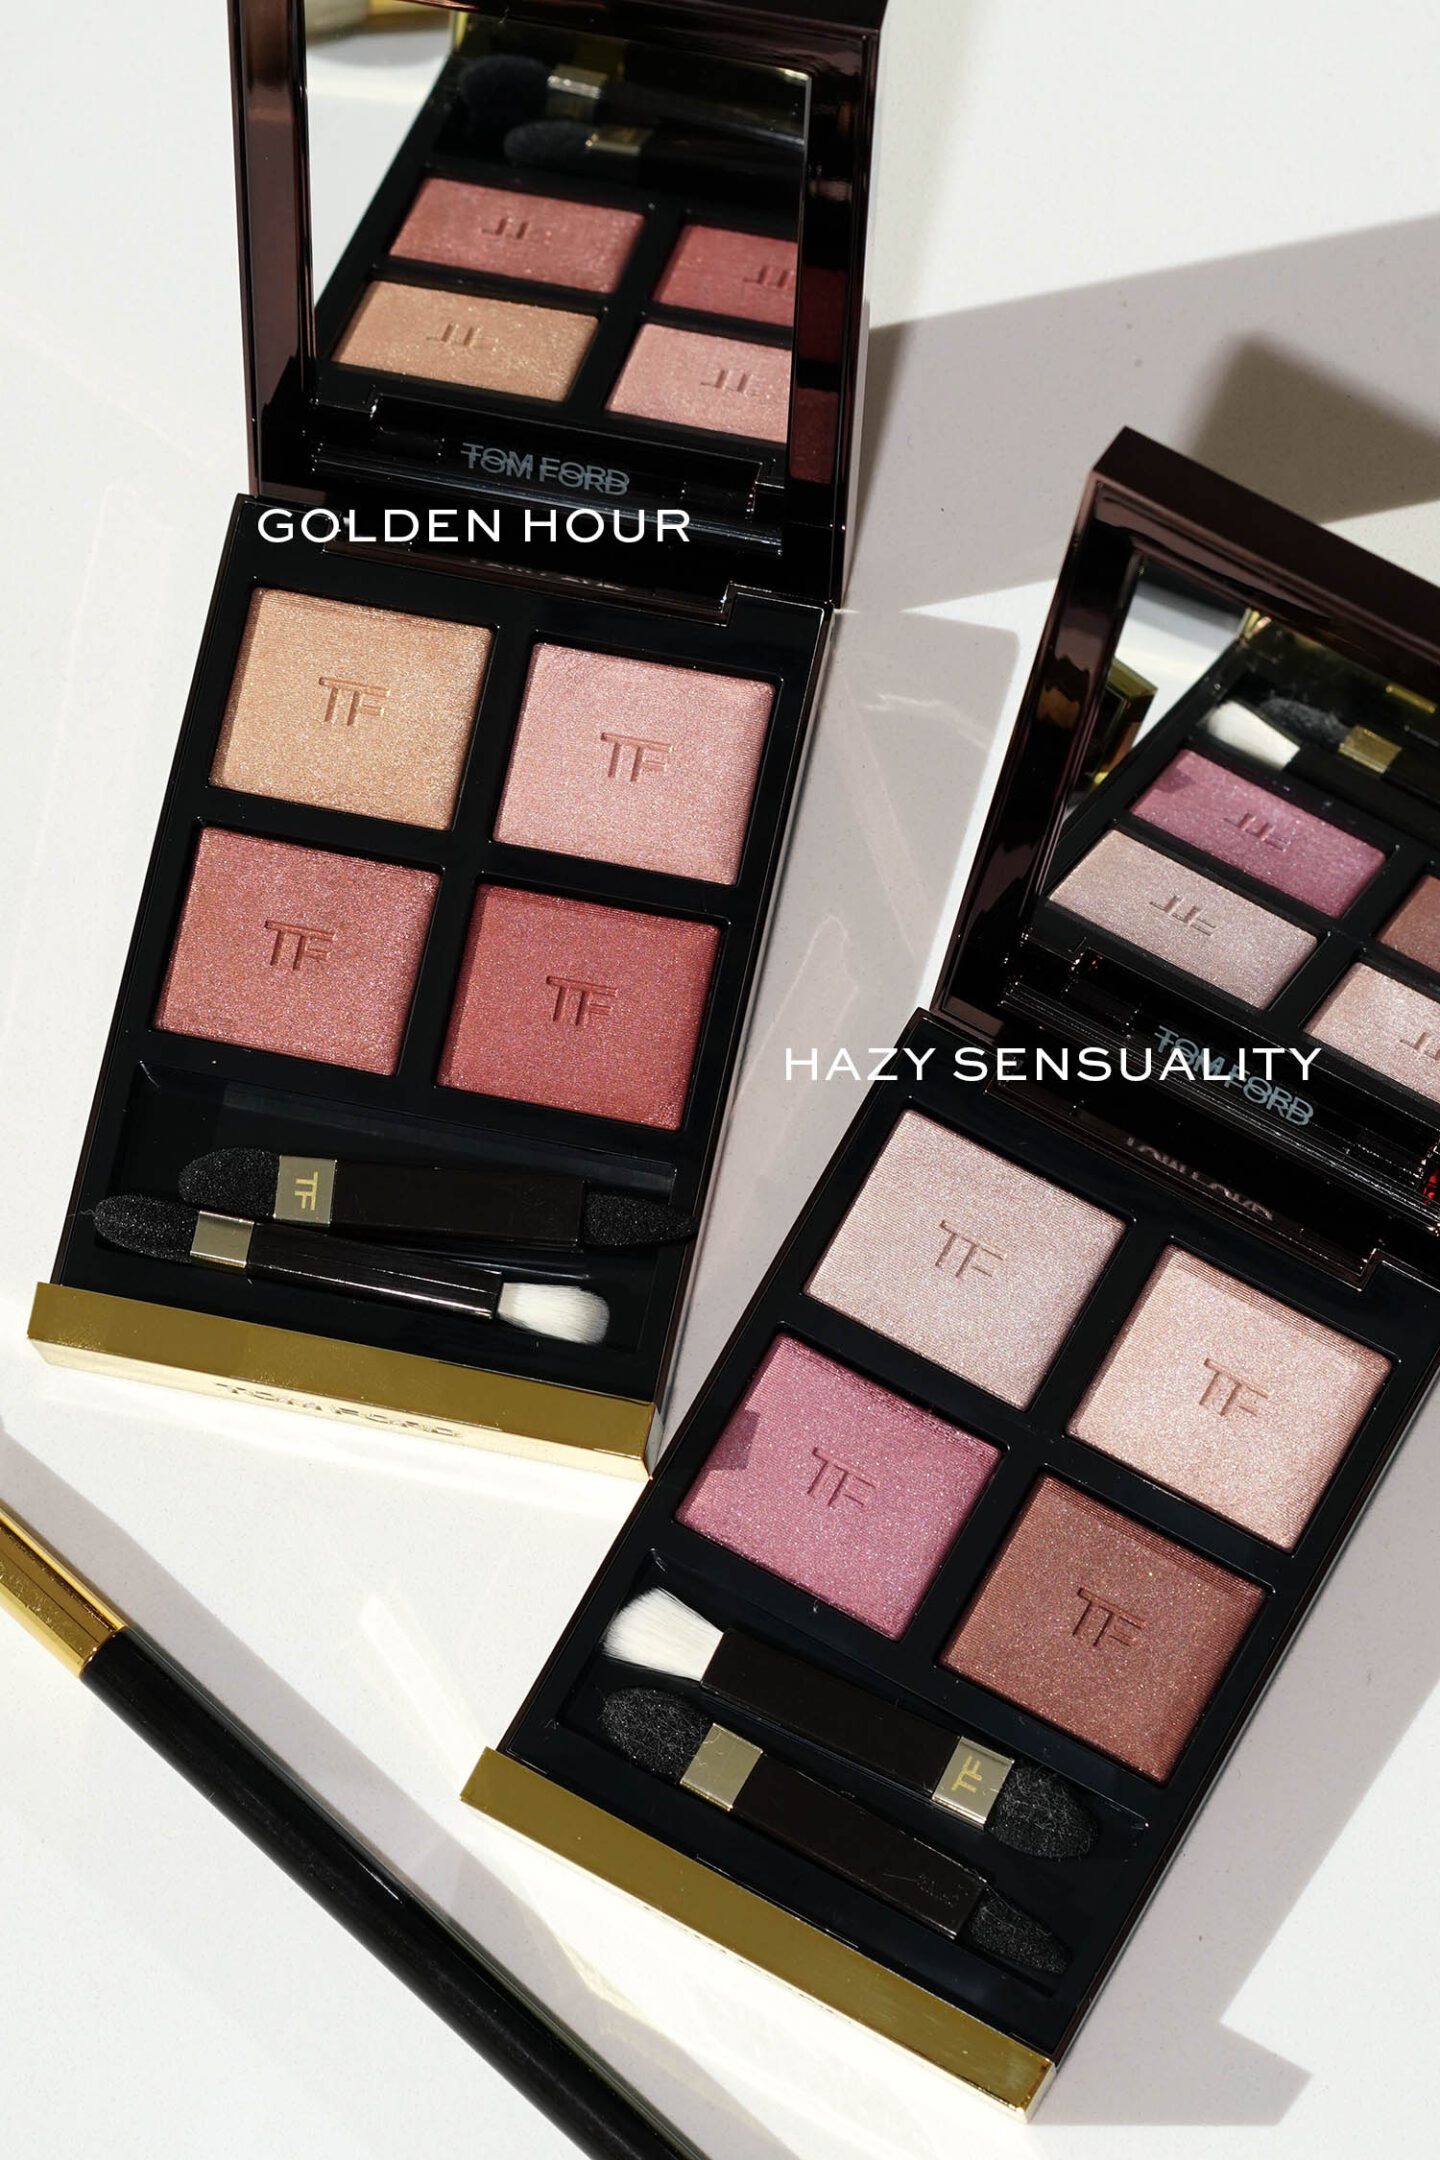 Tom Ford Eyeshadow Quads in Golden Hour and Hazy Sensuality